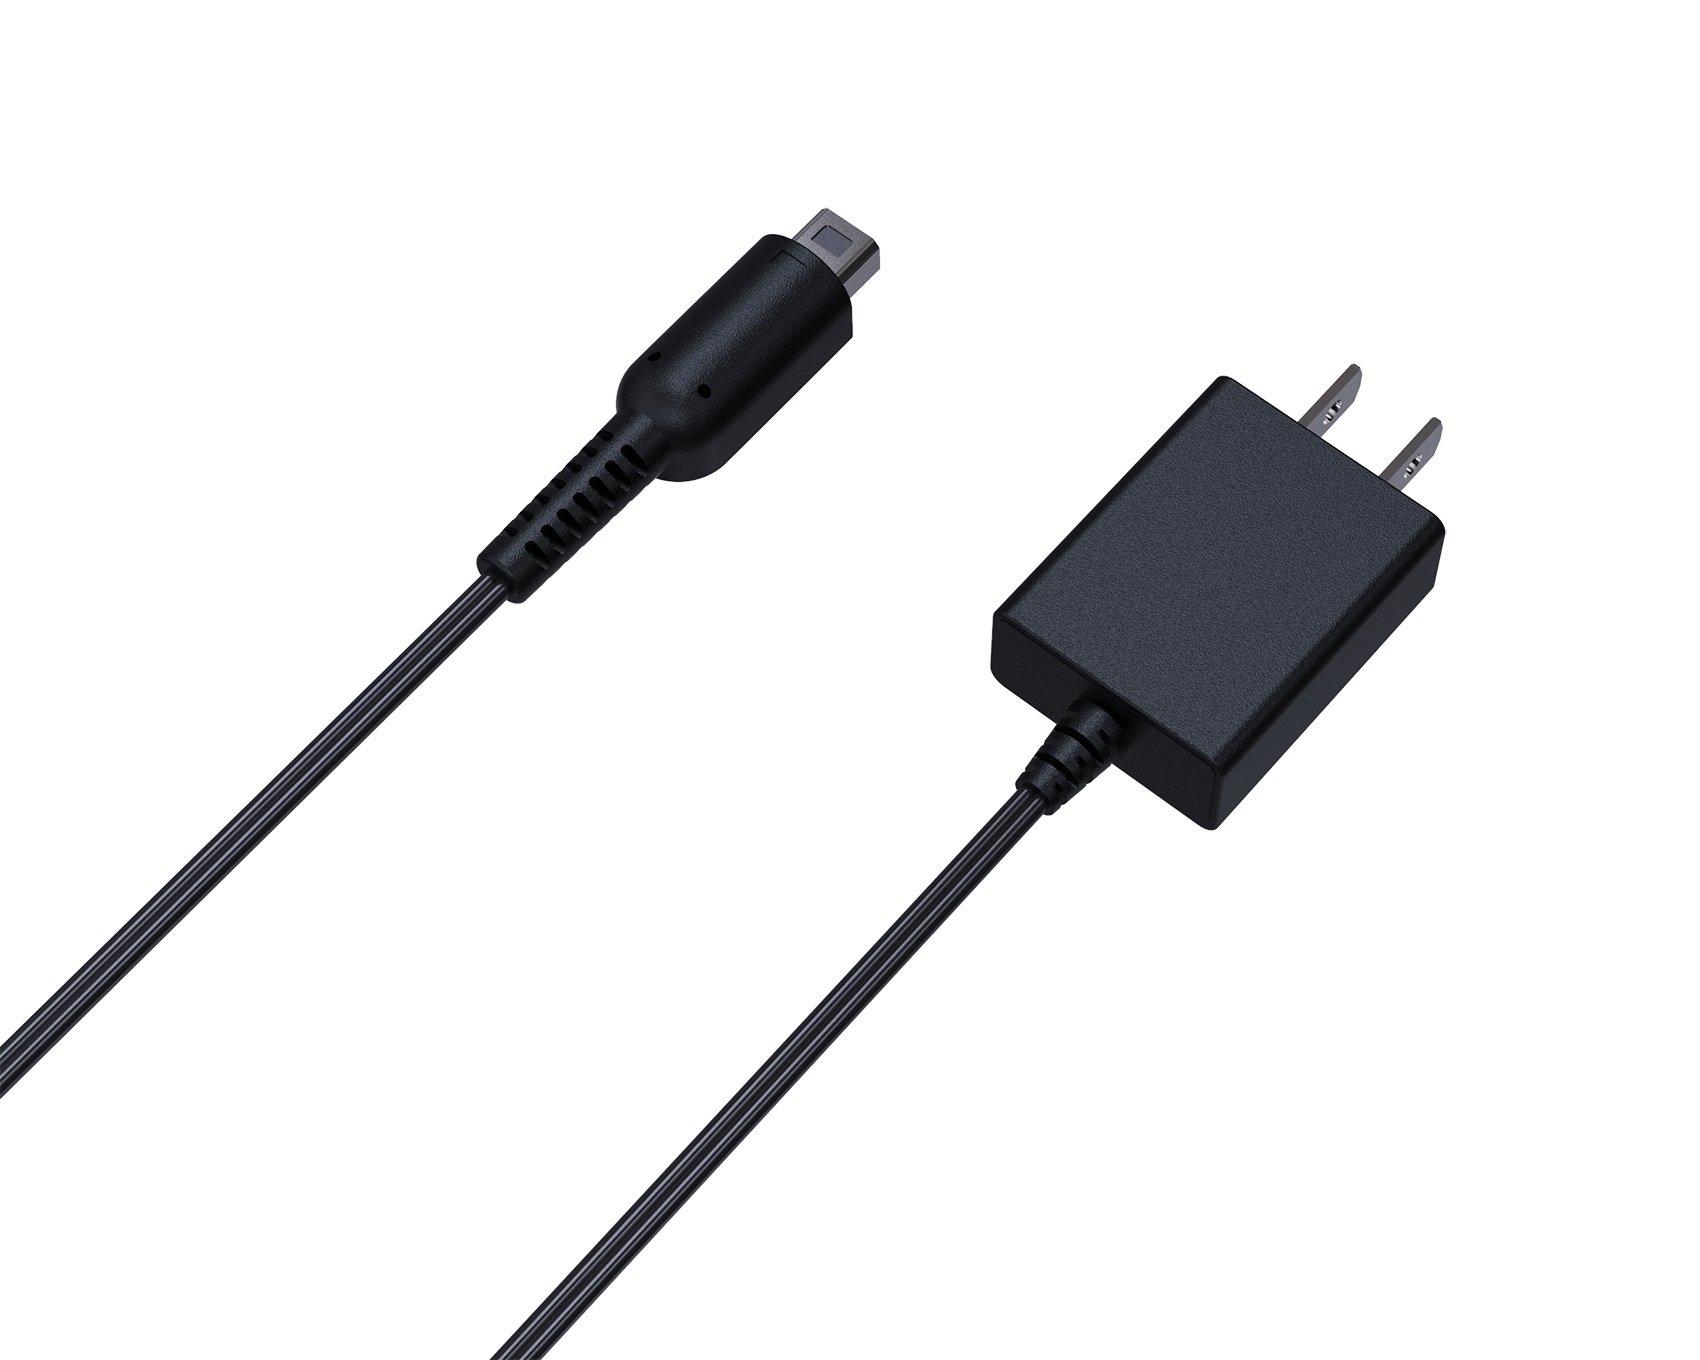 YoK AC Adapter for Nintendo 3DS, 2DS, and DSi | GameStop